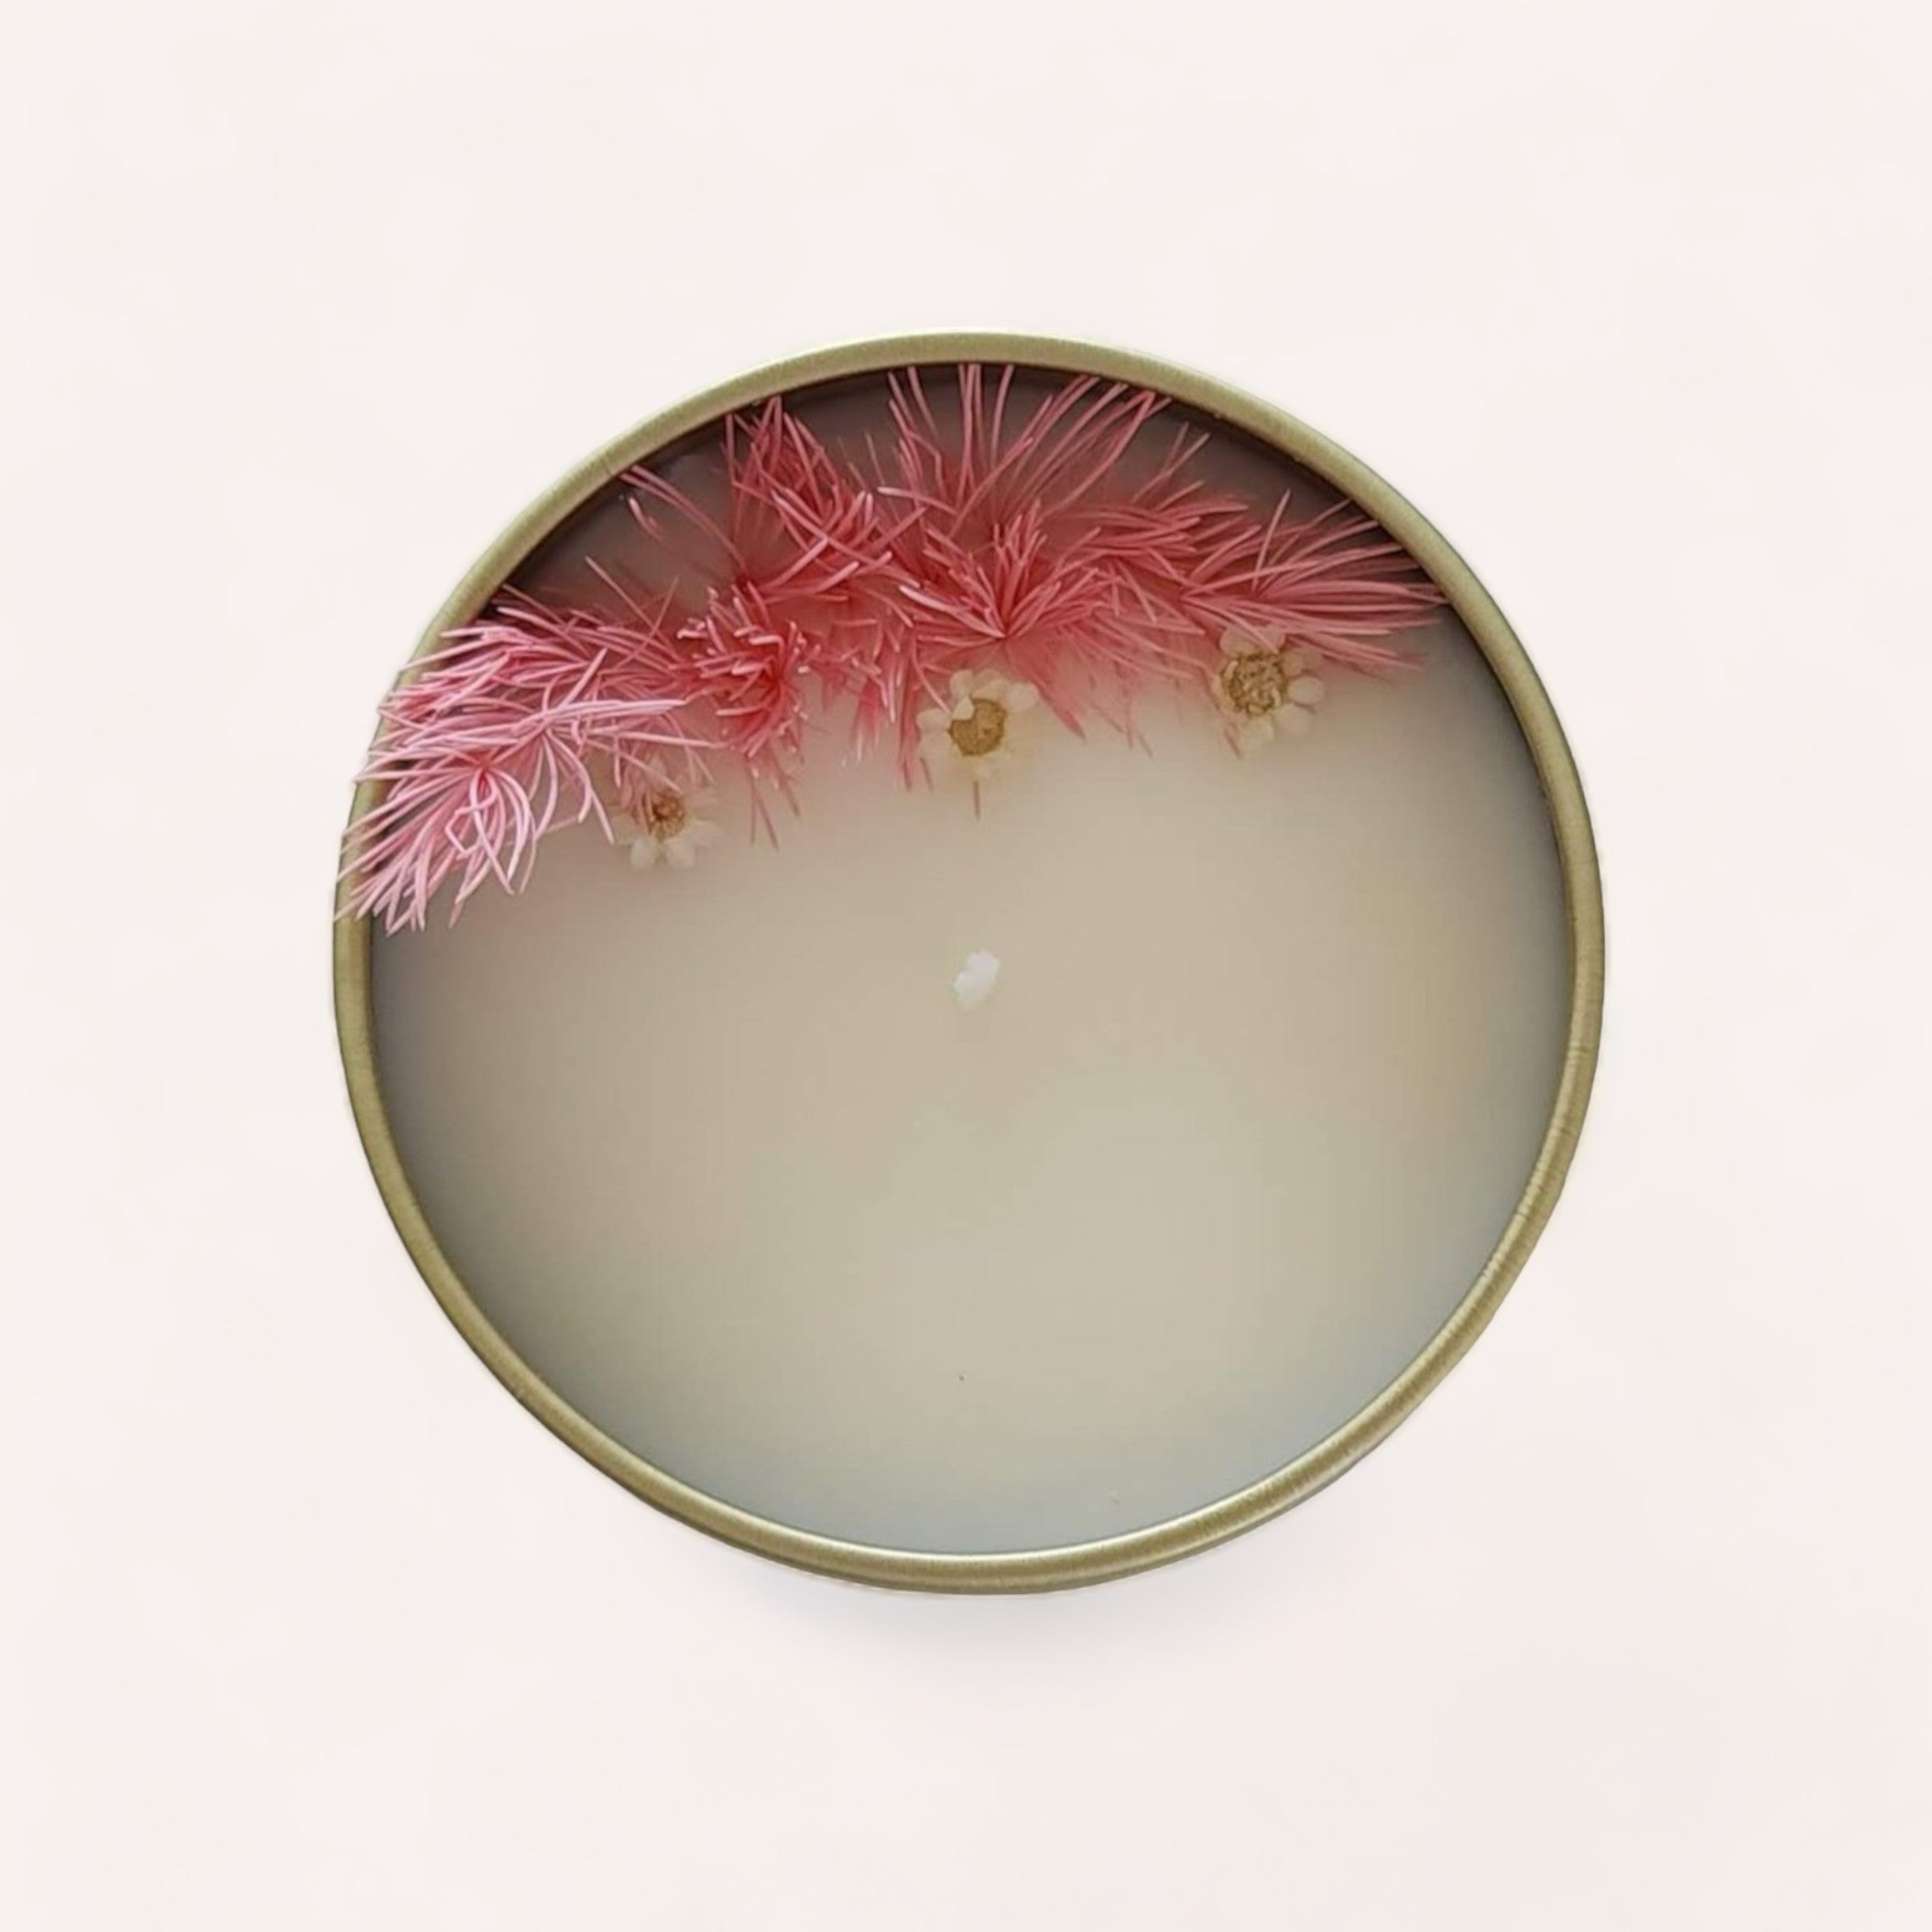 A petri dish with bacterial colonies exhibiting a pink coloration reminiscent of mimosa blossoms and a filamentous growth pattern, cultivated in a microbiology laboratory scented with Mandarin + Mimosa Candle by Wix's Lane Co.